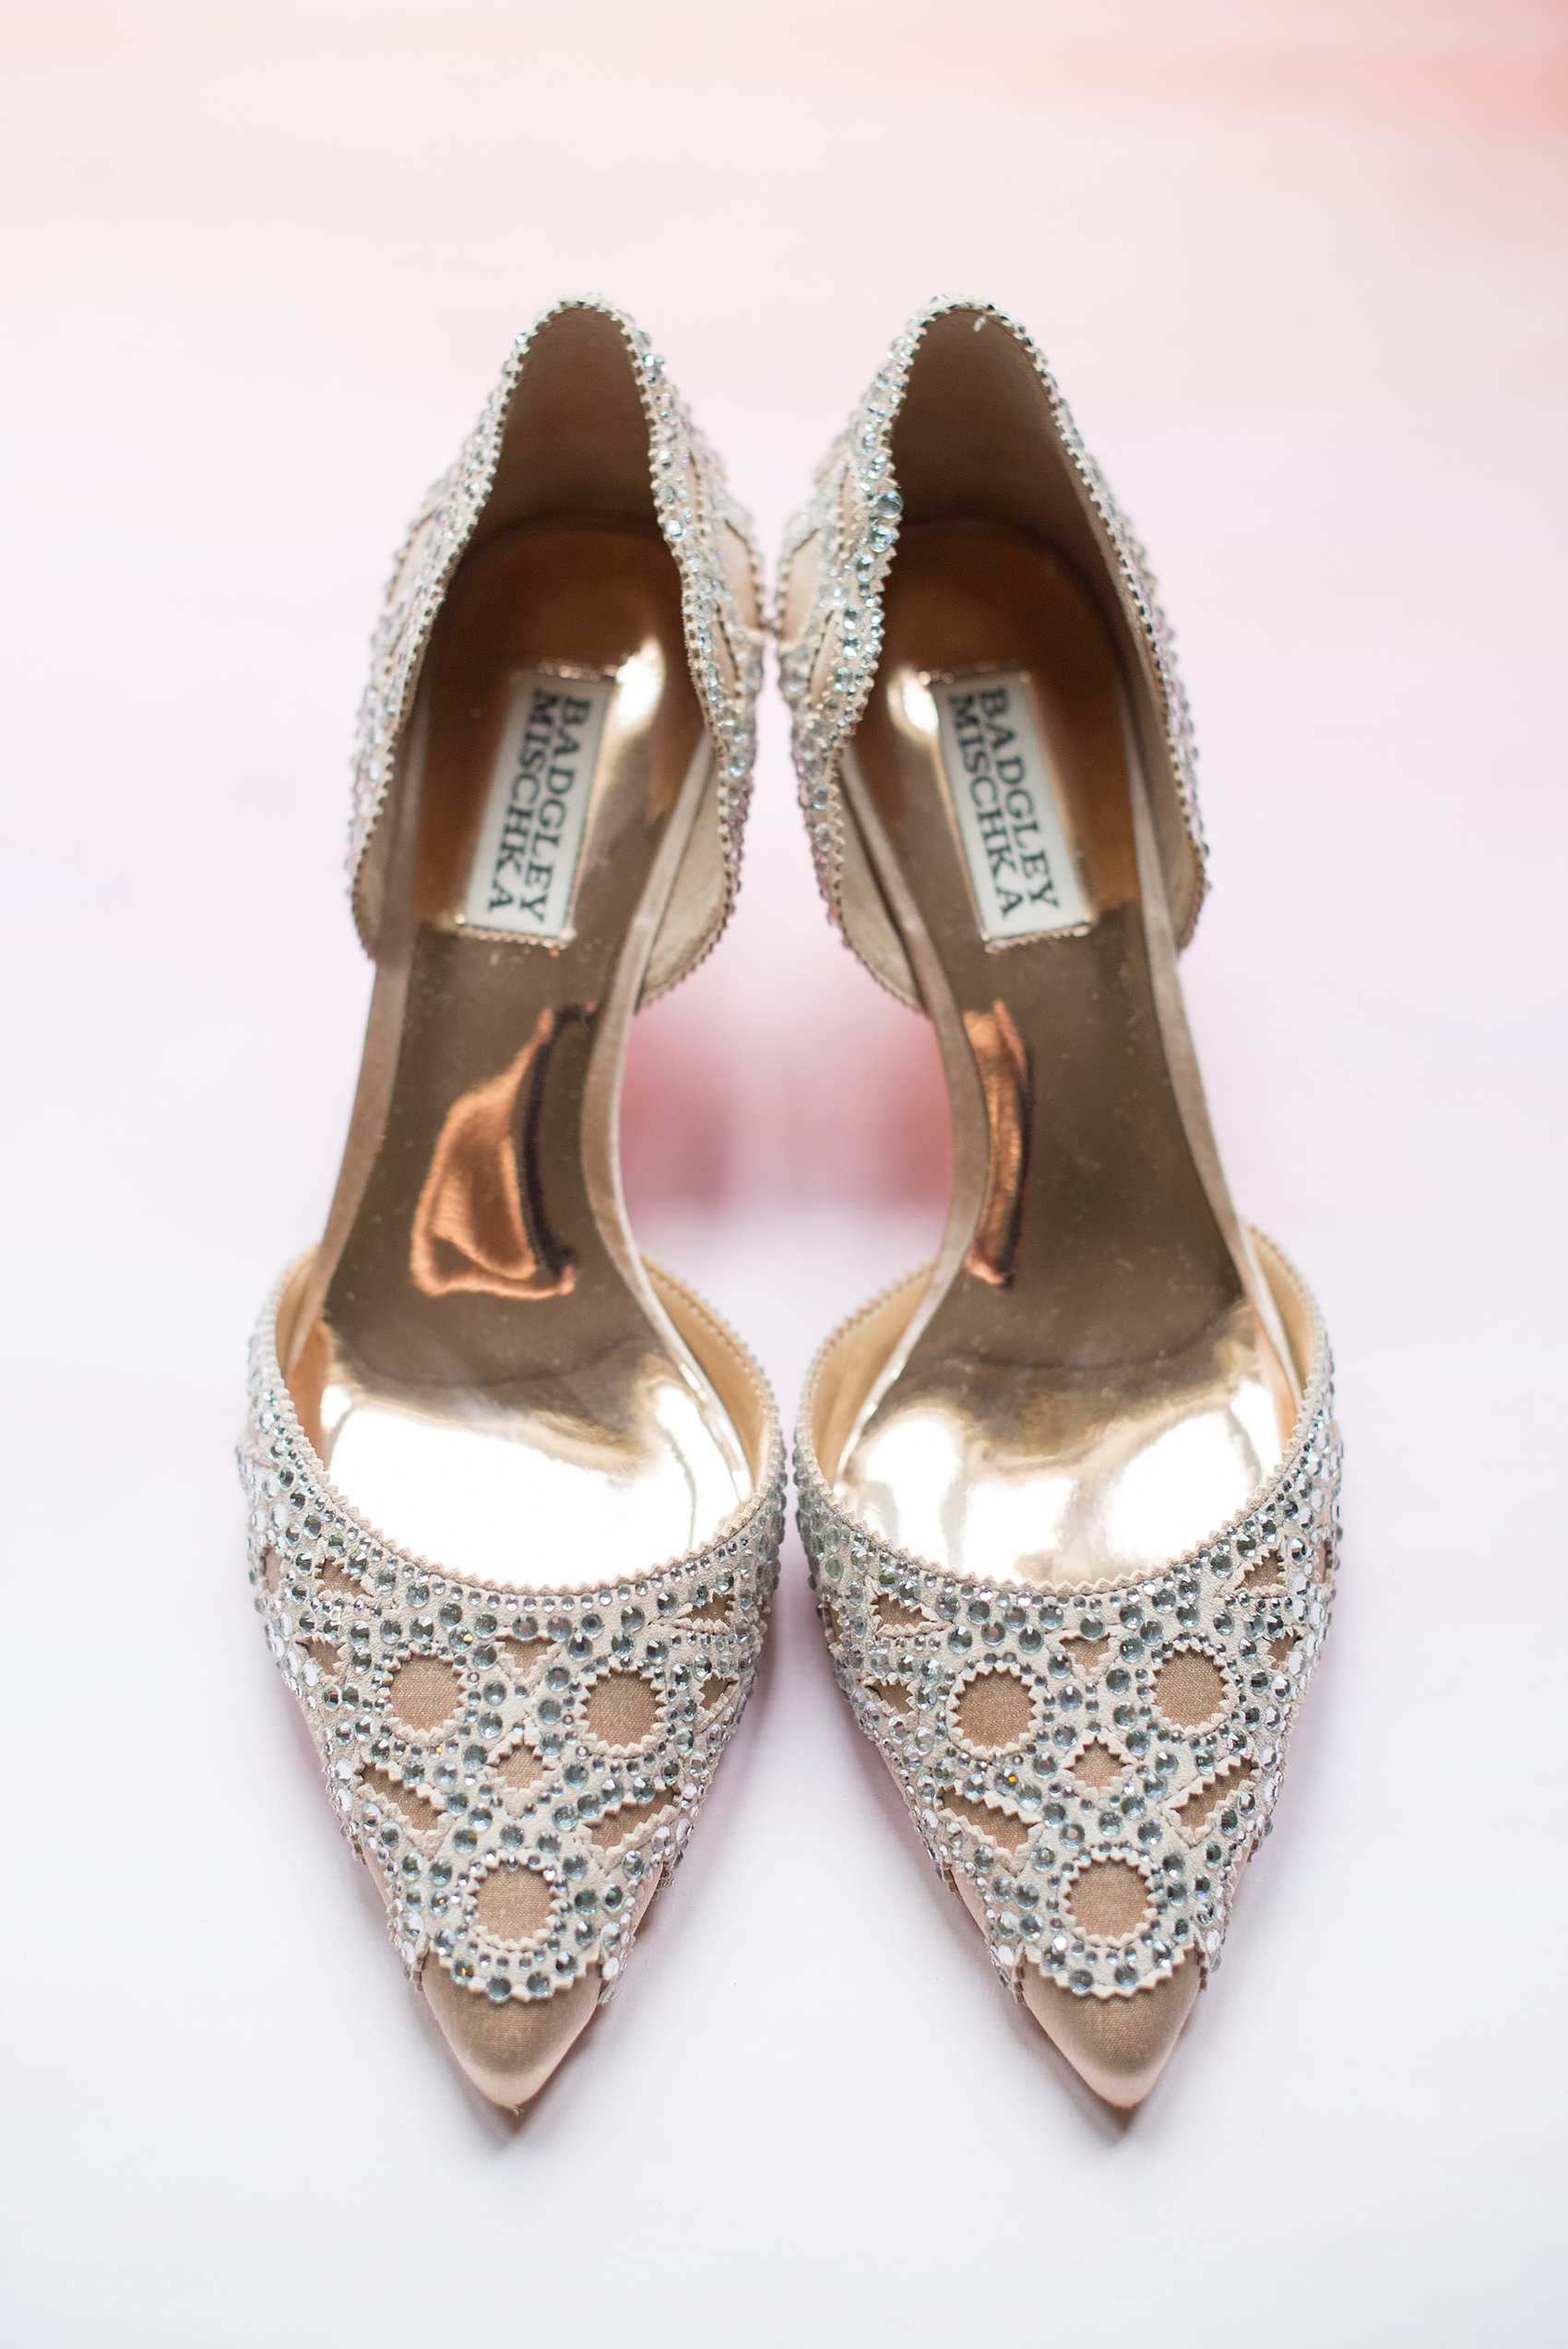 Waveny House wedding photos in Connecticut by Mikkel Paige Photography. Picture of the bride's low heel tan rhinestone Badgley Mischka shoes.